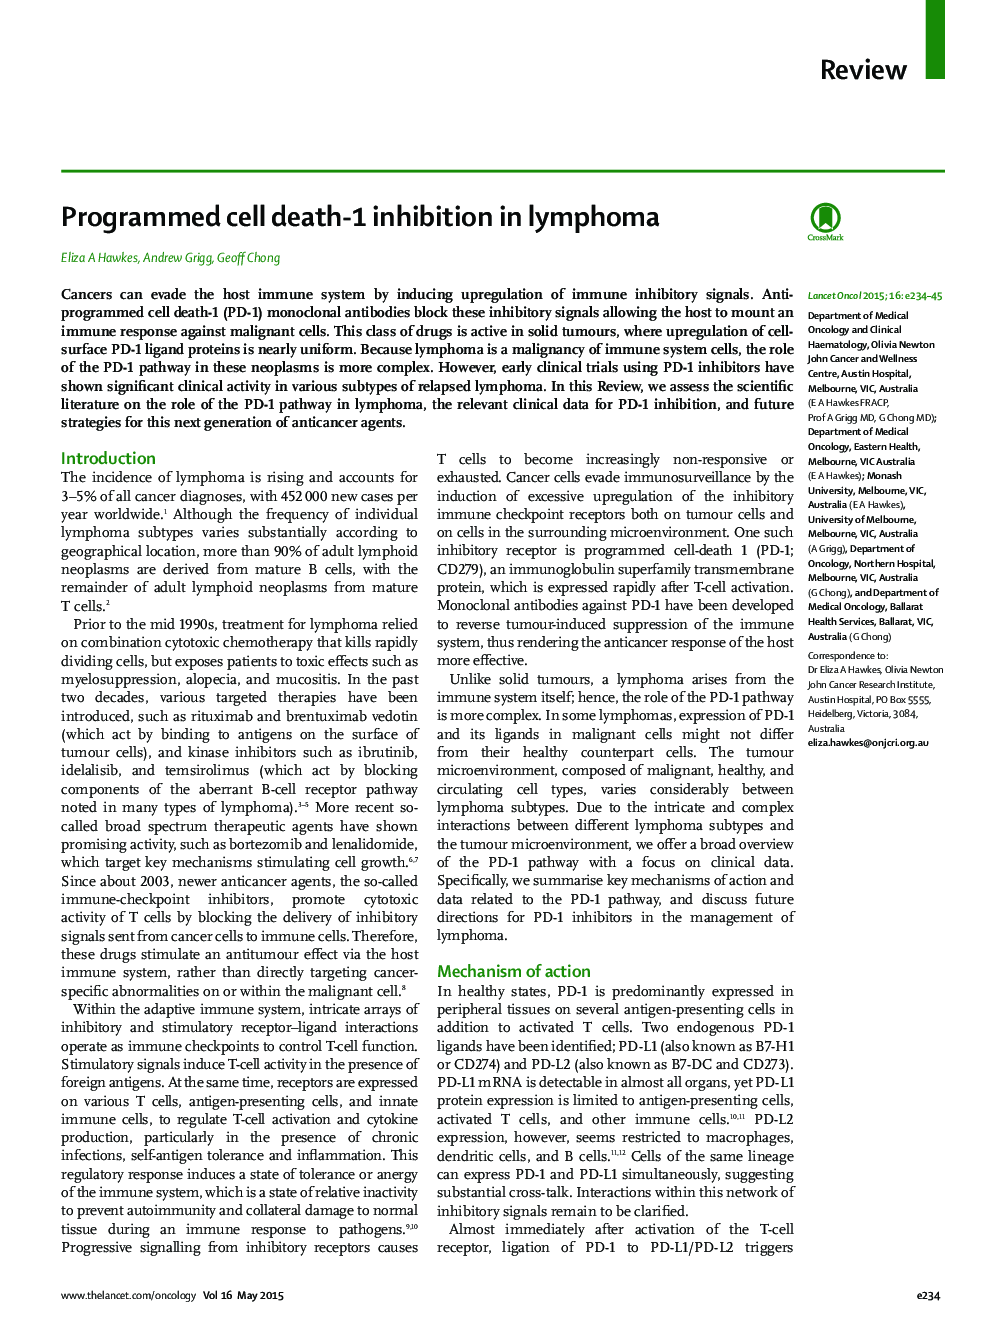 Programmed cell death-1 inhibition in lymphoma